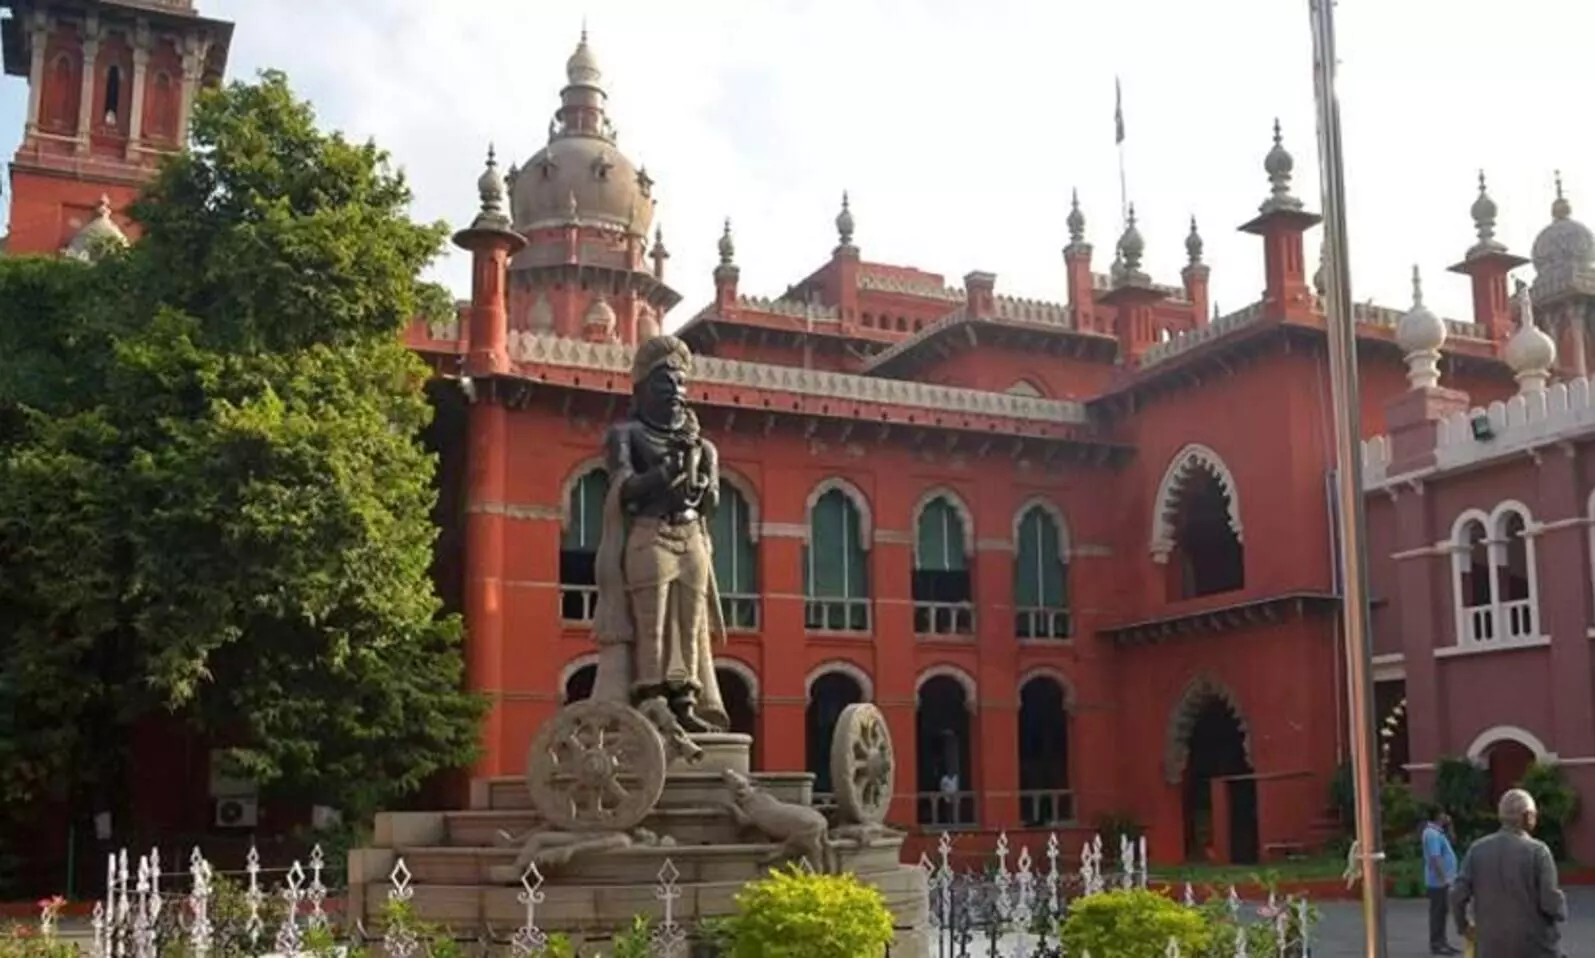 Language of Gods Tamil hymns should be recited in temples: Madras HC